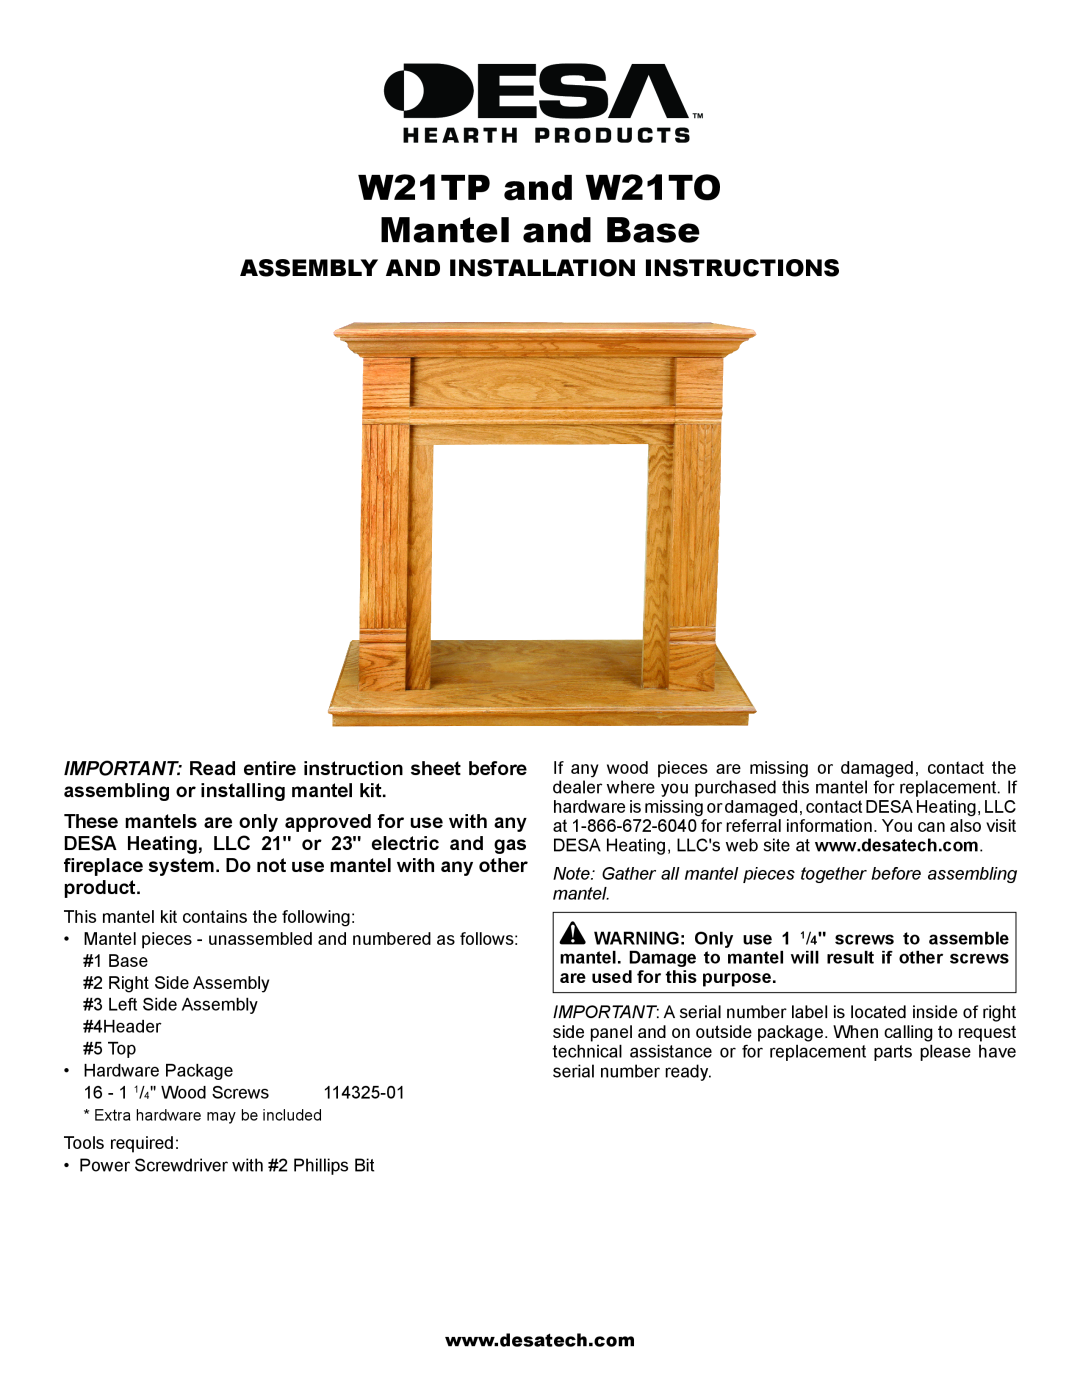 Desa installation instructions W21TP and W21TO Mantel and Base, Assembly And Installation Instructions 